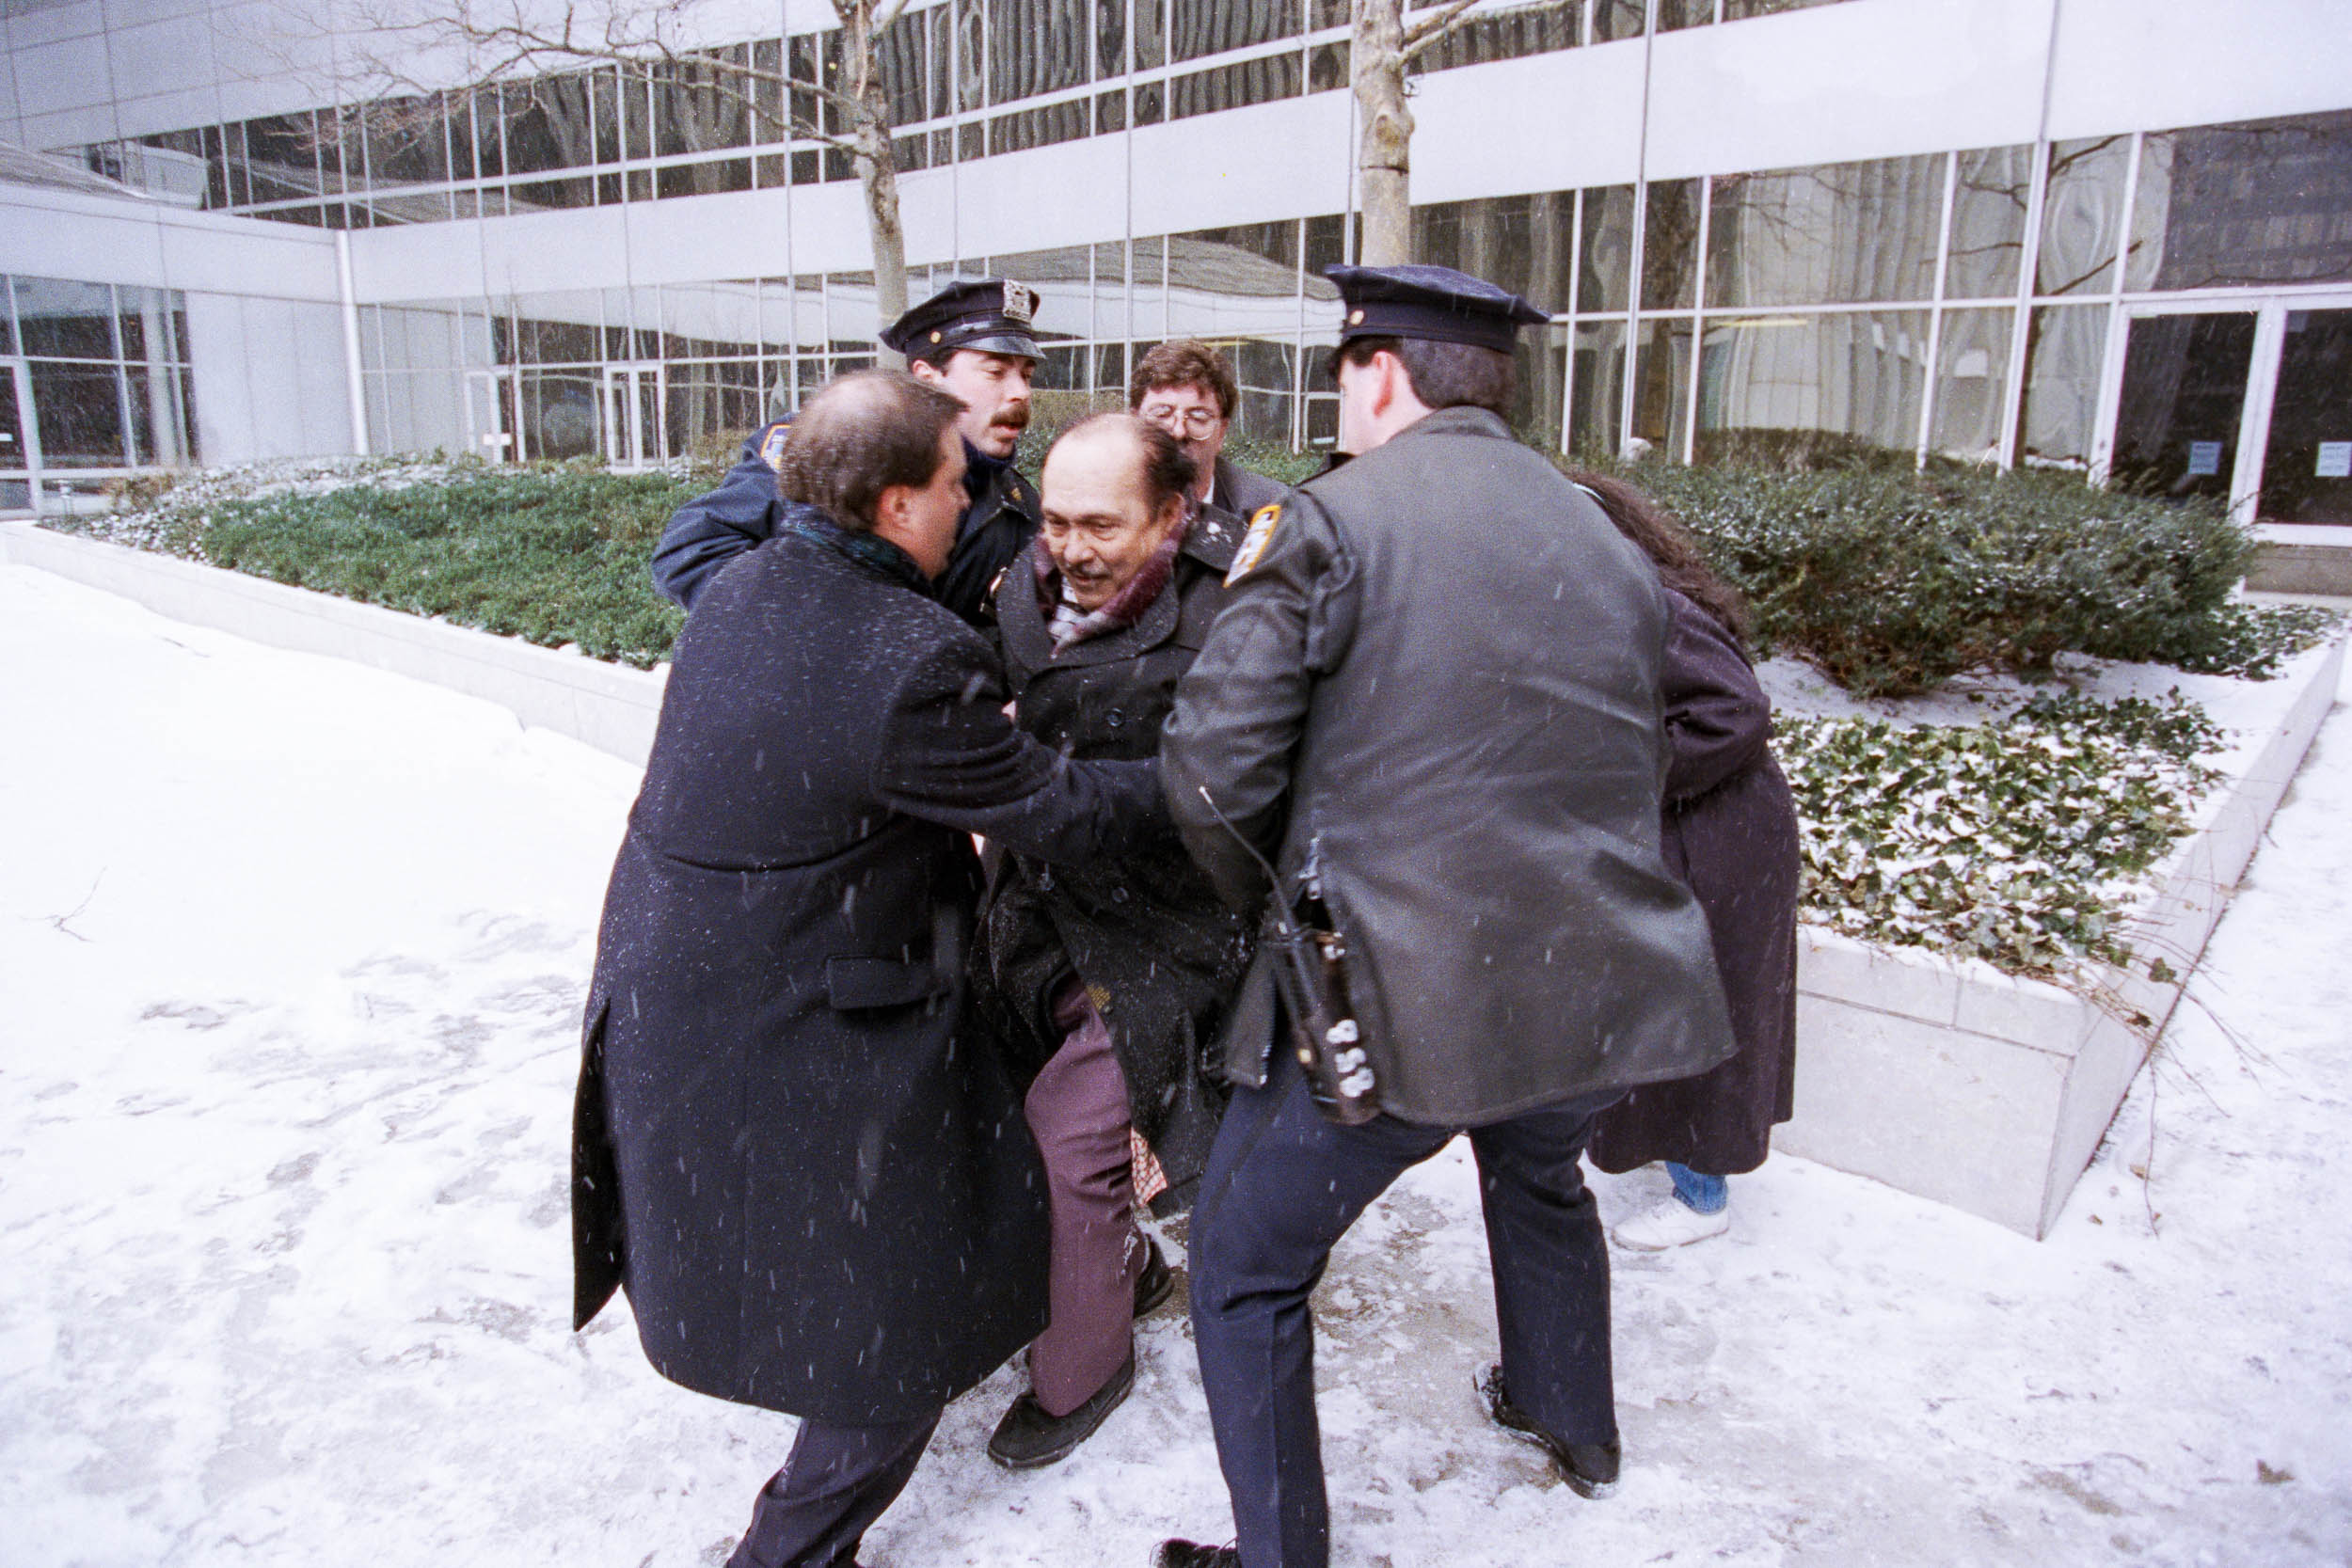 An office worker gets help getting back to his feet outside the World TradeCenter, NY, 1993